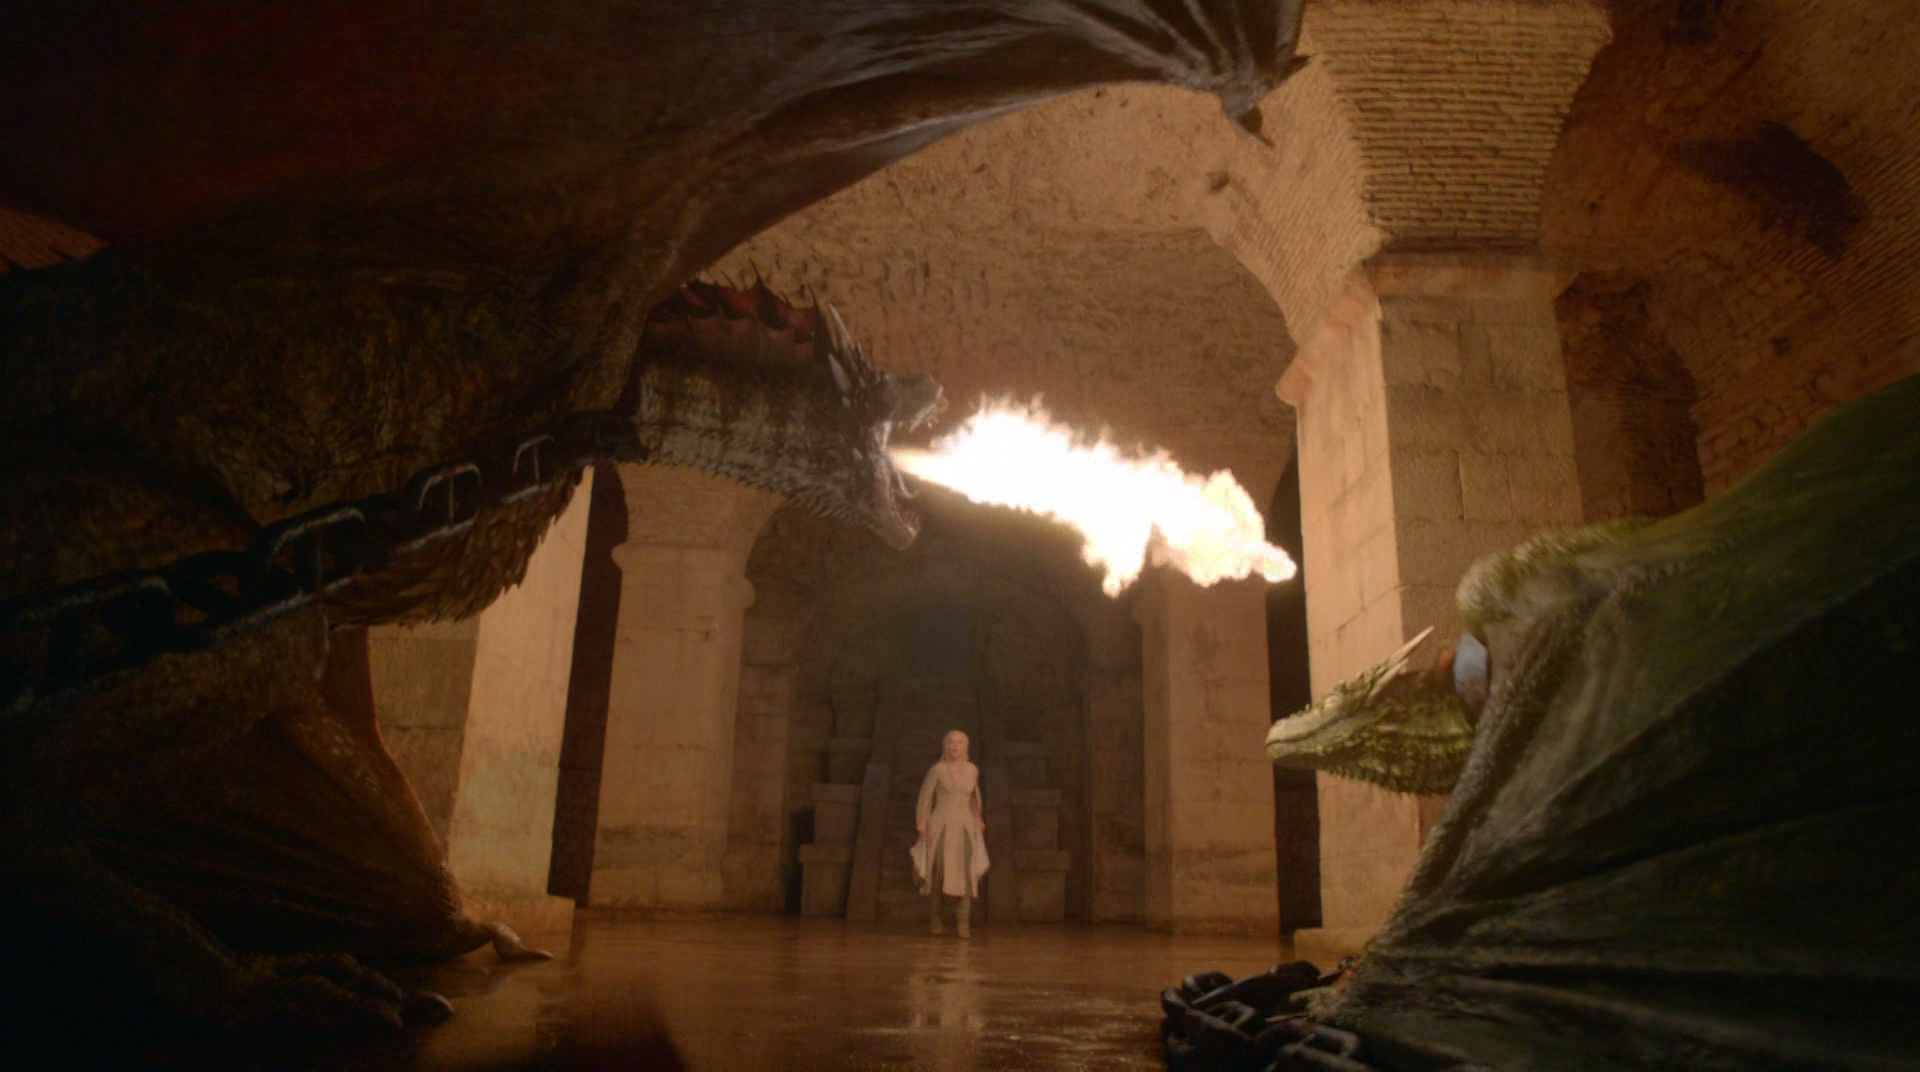 [Review] - Game Of Thrones, Season 5 Episode 1, "The Wars To Come"